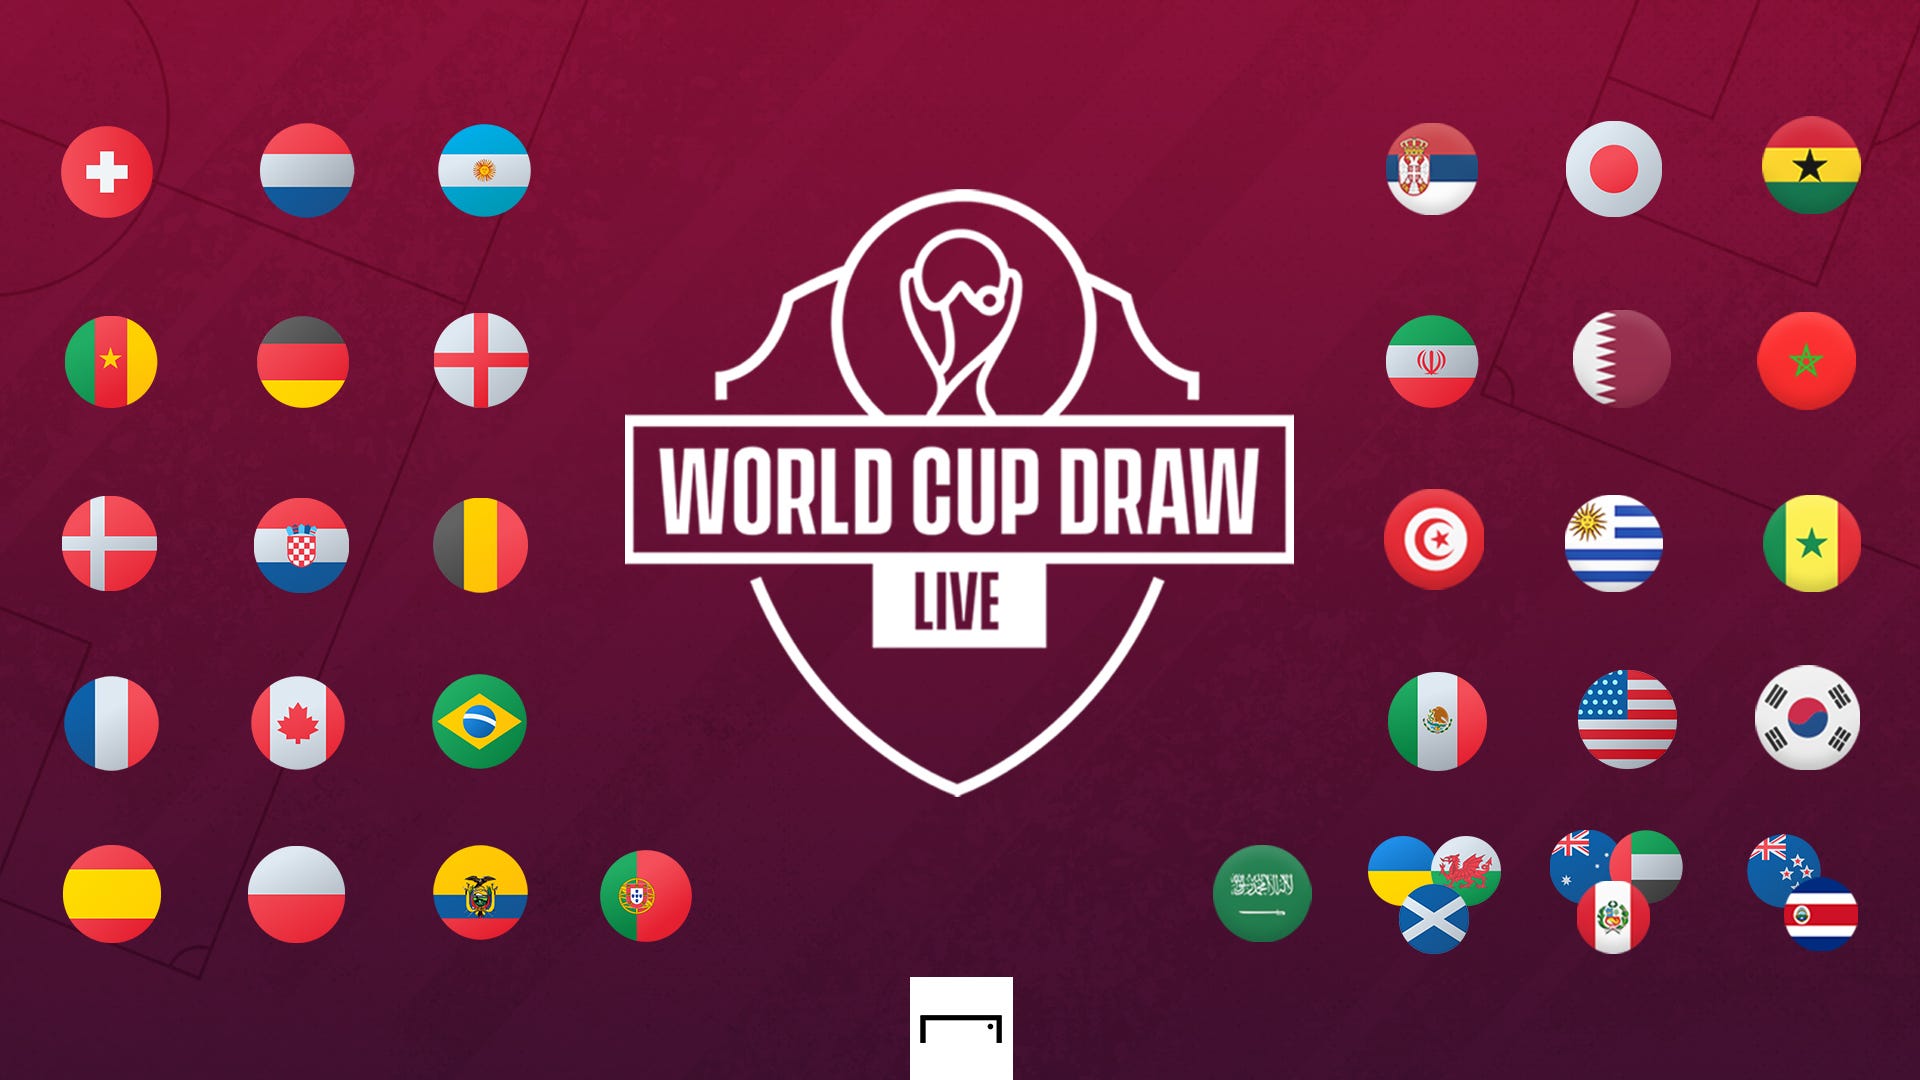 LiveScore - The FIFA 2022 World Cup draw in full 😍 | Facebook